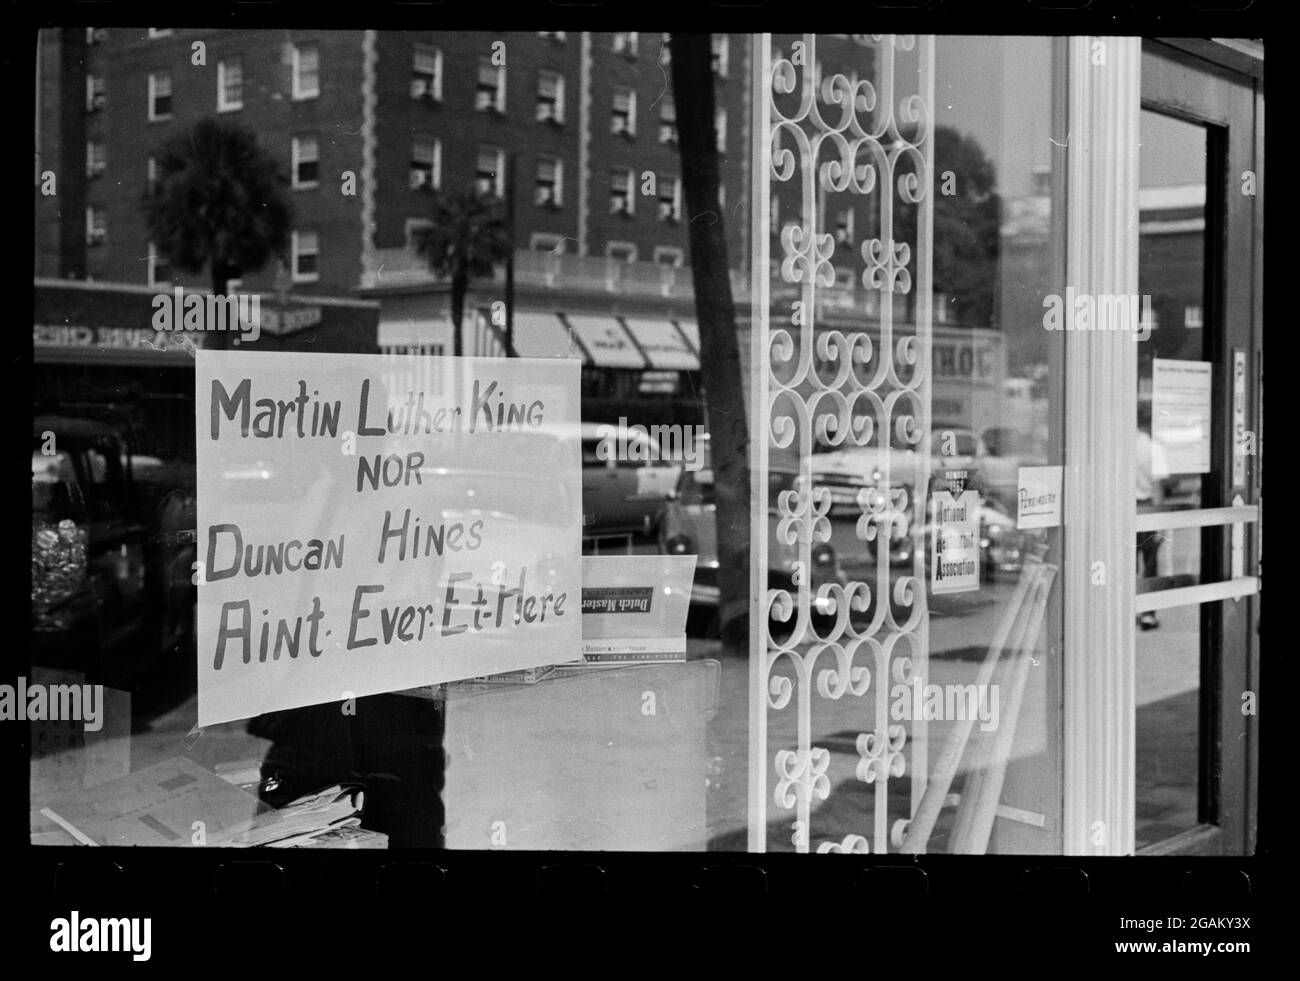 Sign posted on window of a restaurant reading 'Martin Luther King Nor Duncan Hines Ain't Ever Et Here' warns that the business refuses service to African-Americans, Albany, GA,8/18/1962. (Photo by Warren K Leffler/US News & World Report Collection/RBM Vintage Images) Stock Photo